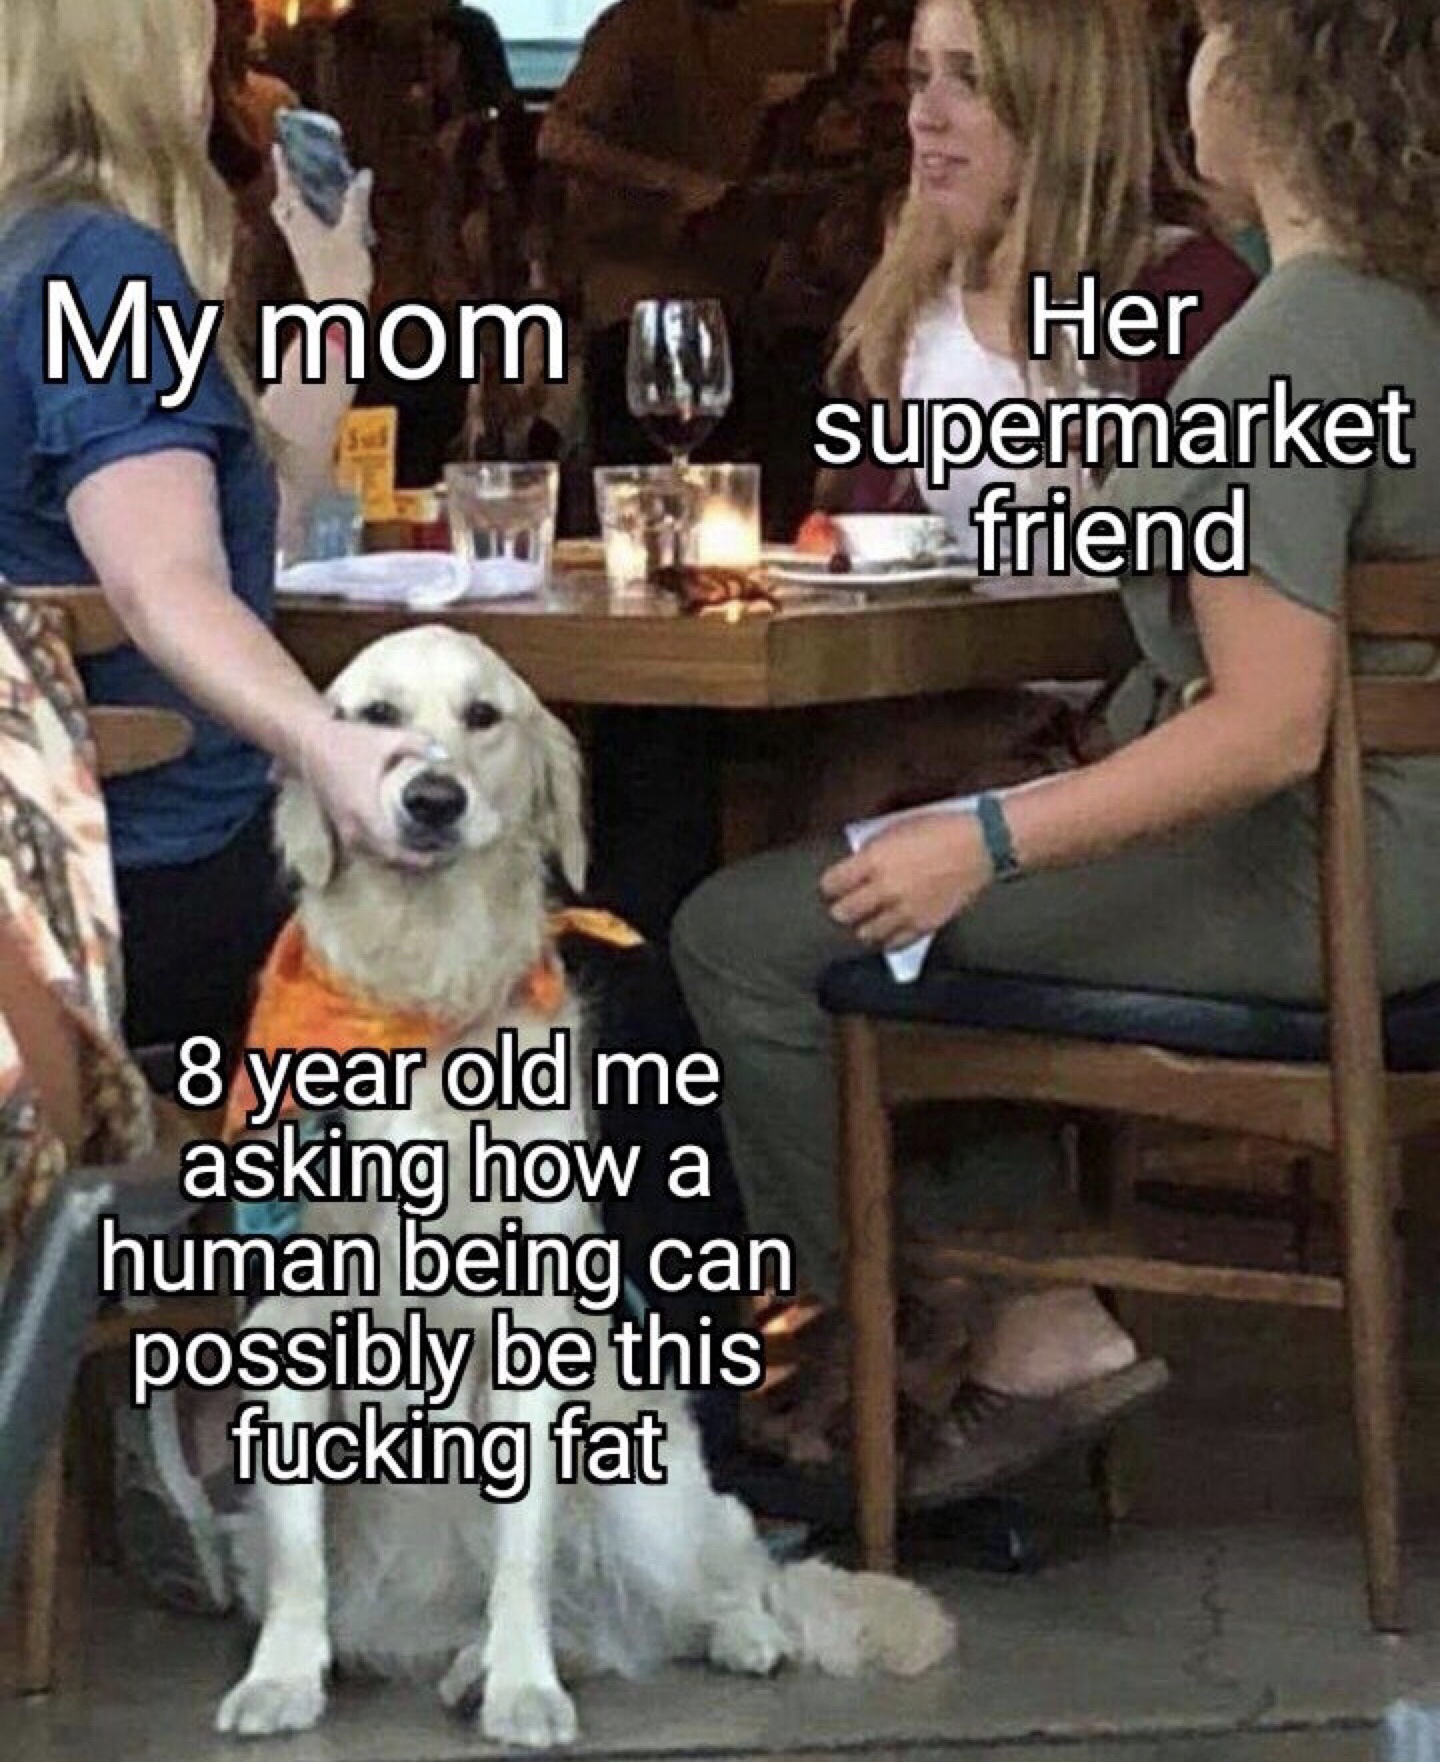 woman holding dogs mouth - My mom 10 Her supermarket friend 8 year old me asking how a human being can possibly be this fucking fat